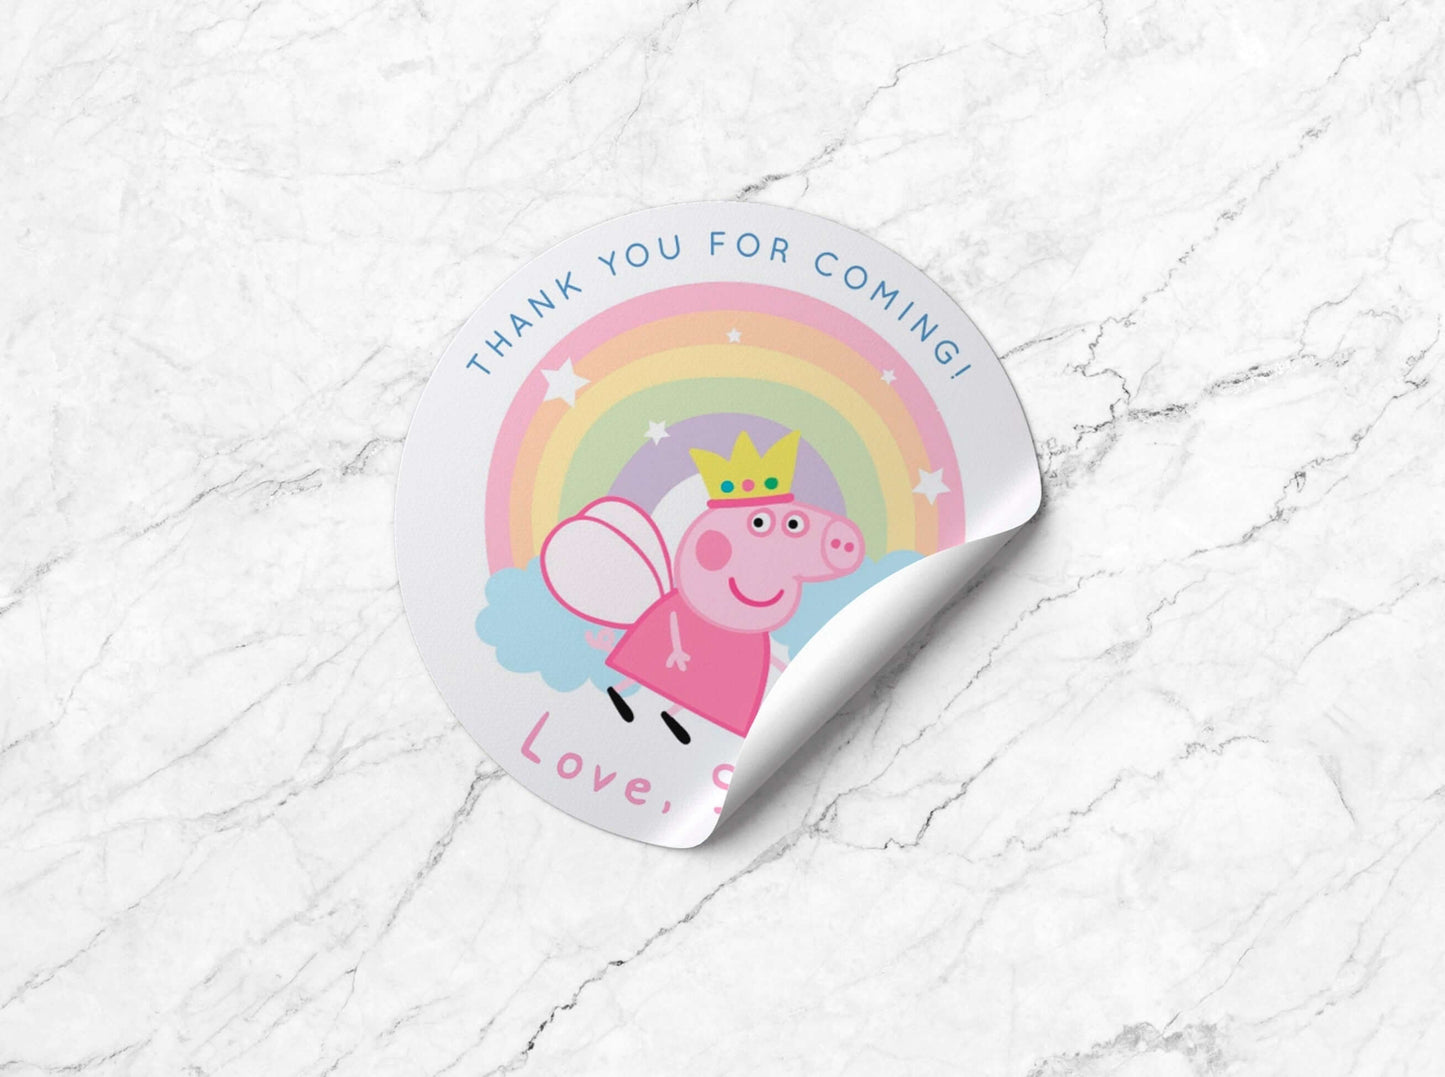 FAIRY PEPPA Pig 2" Thank You Tag ★ Instant Download | Editable Text - Digitally Printables